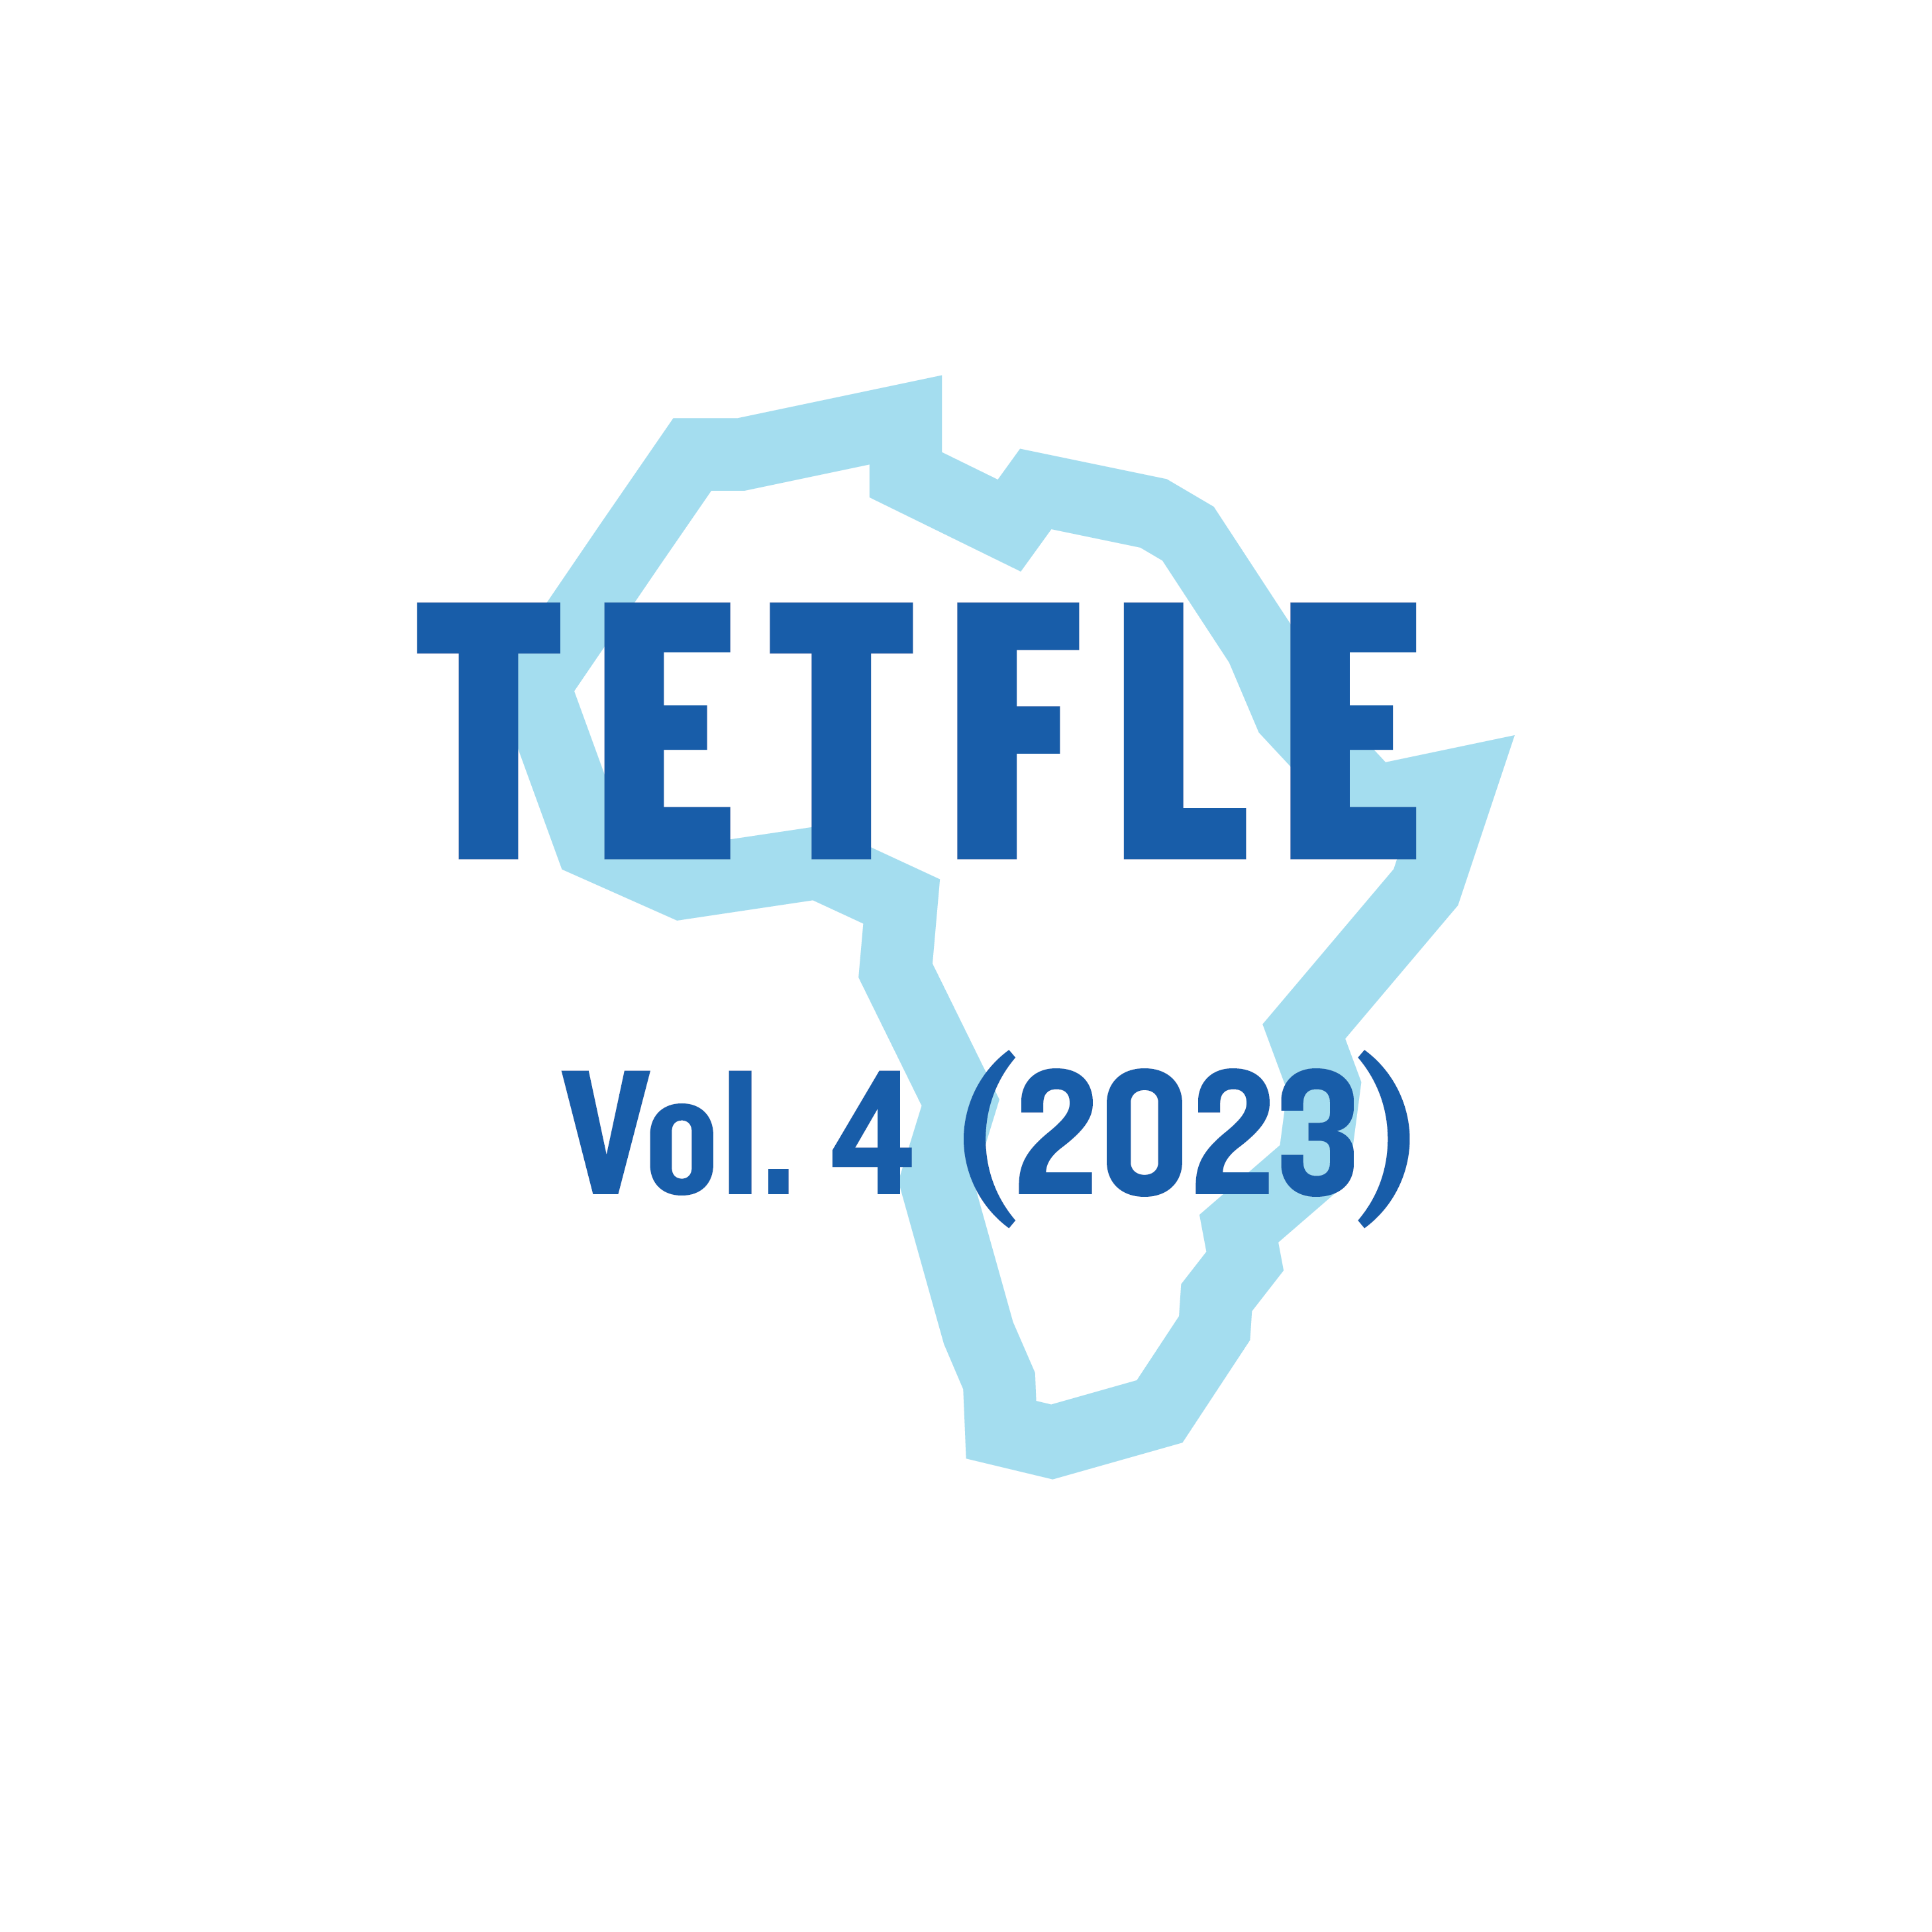 					View Vol. 4 (2023): Teacher Education Through Flexible Learning in Africa
				